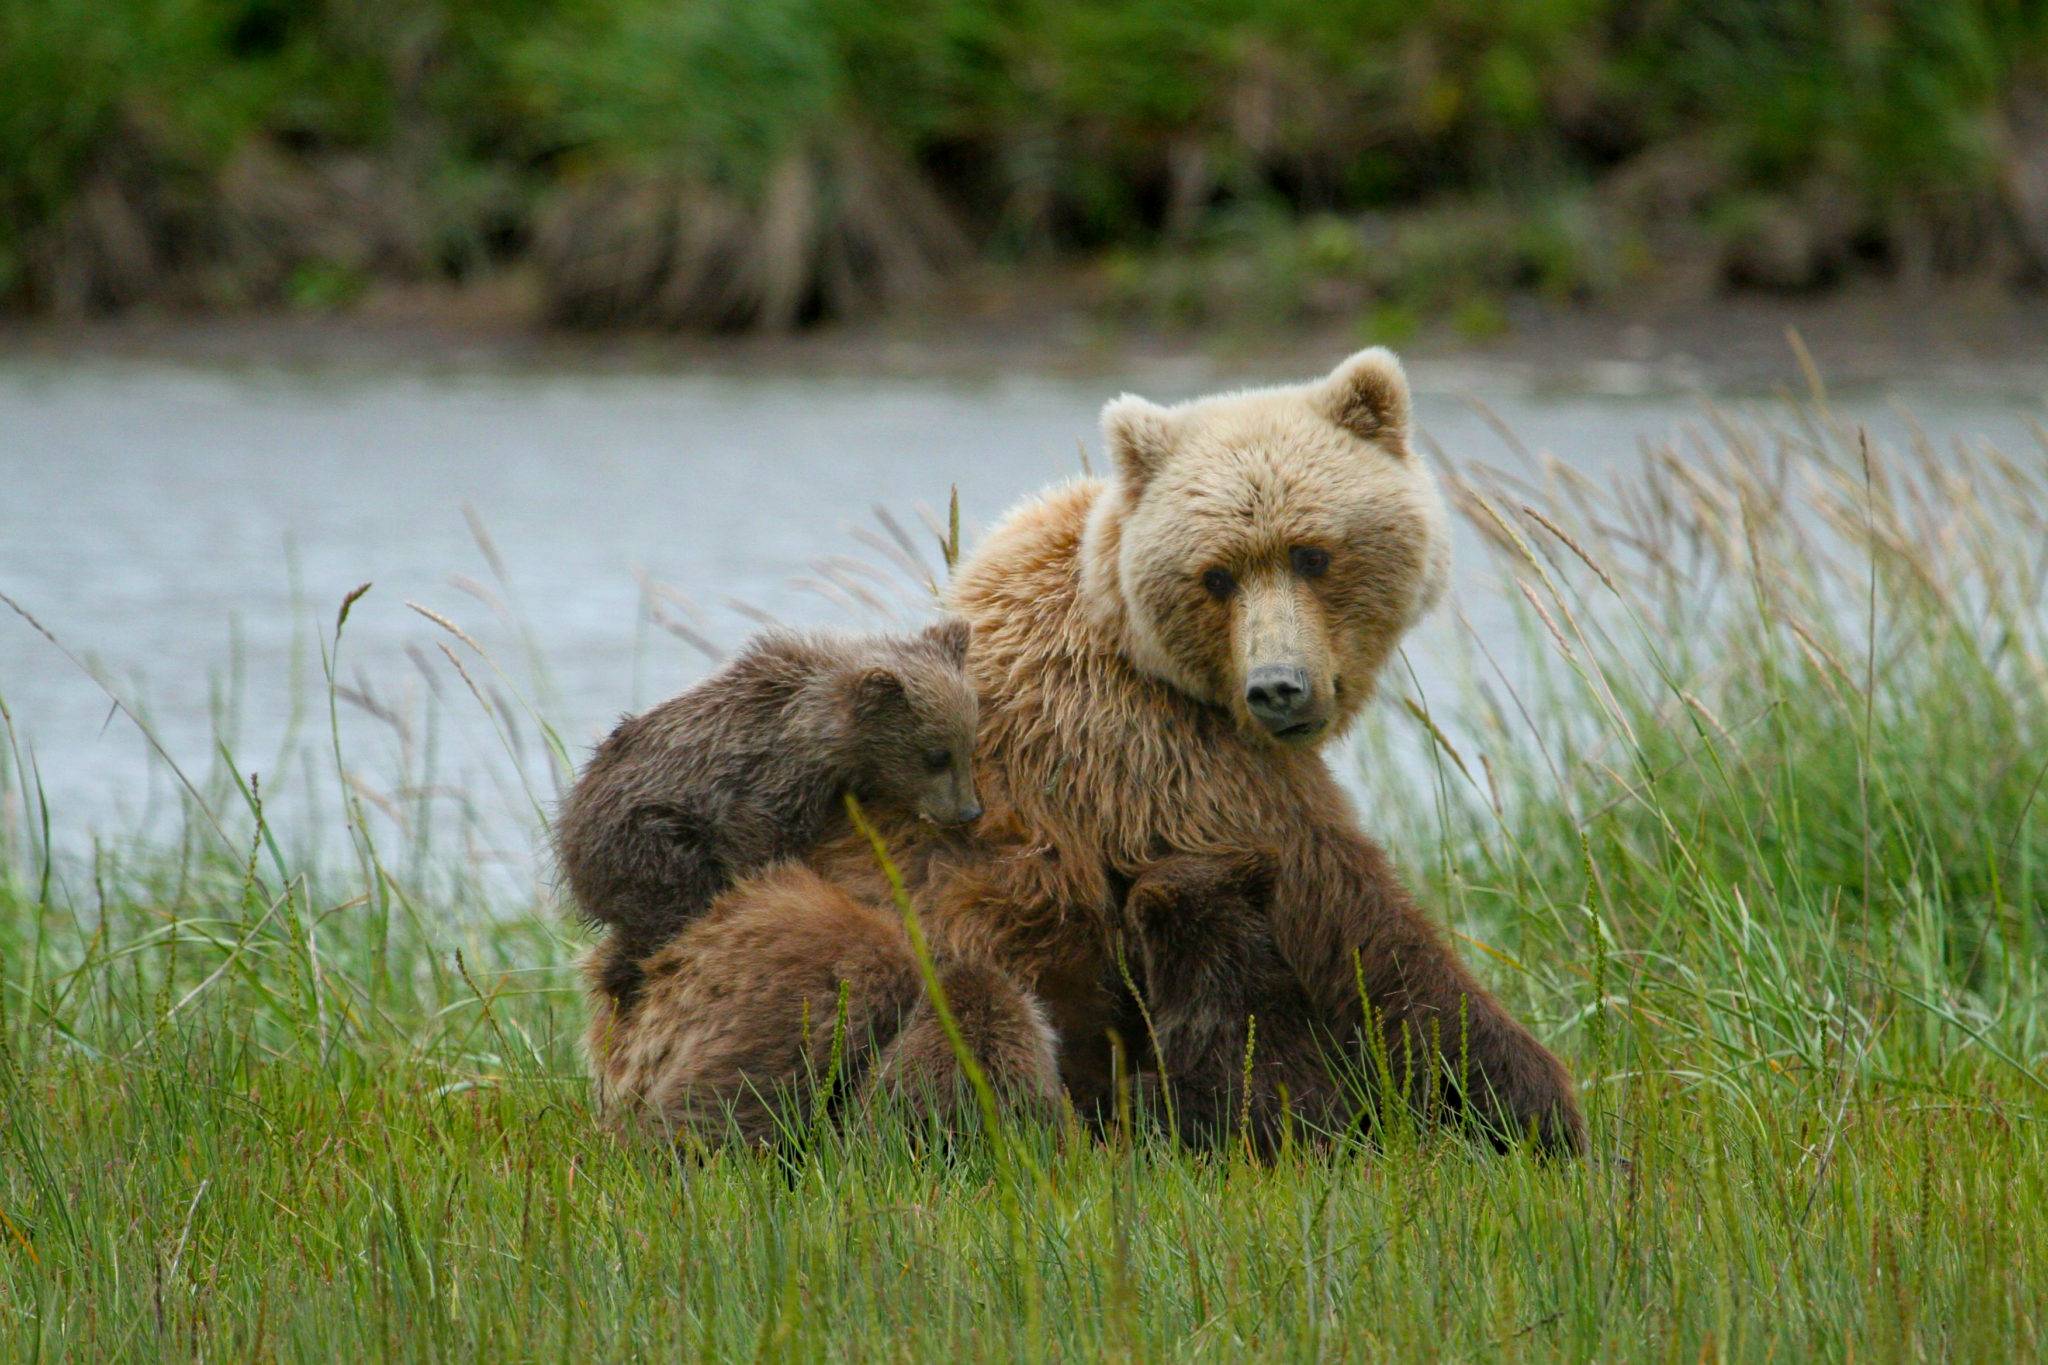 Common Myths About Bears